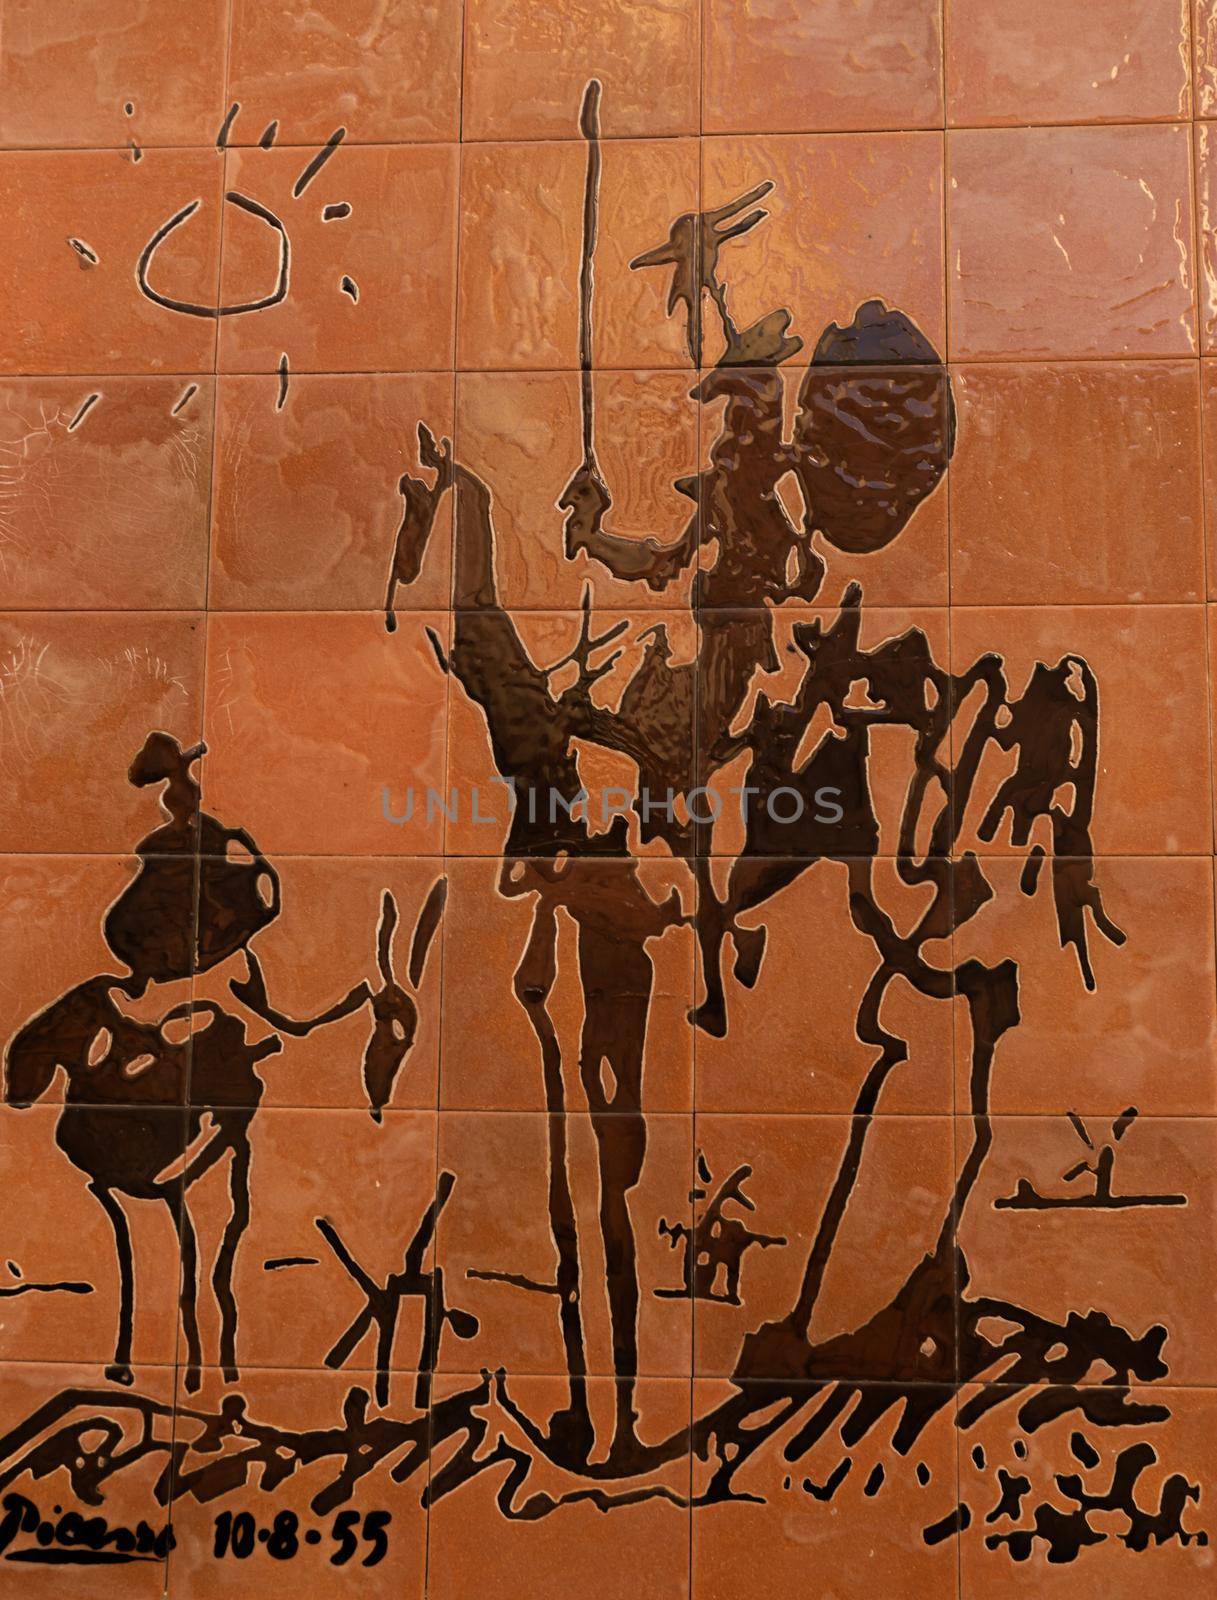 el quijote , painting by picasso by joseantona